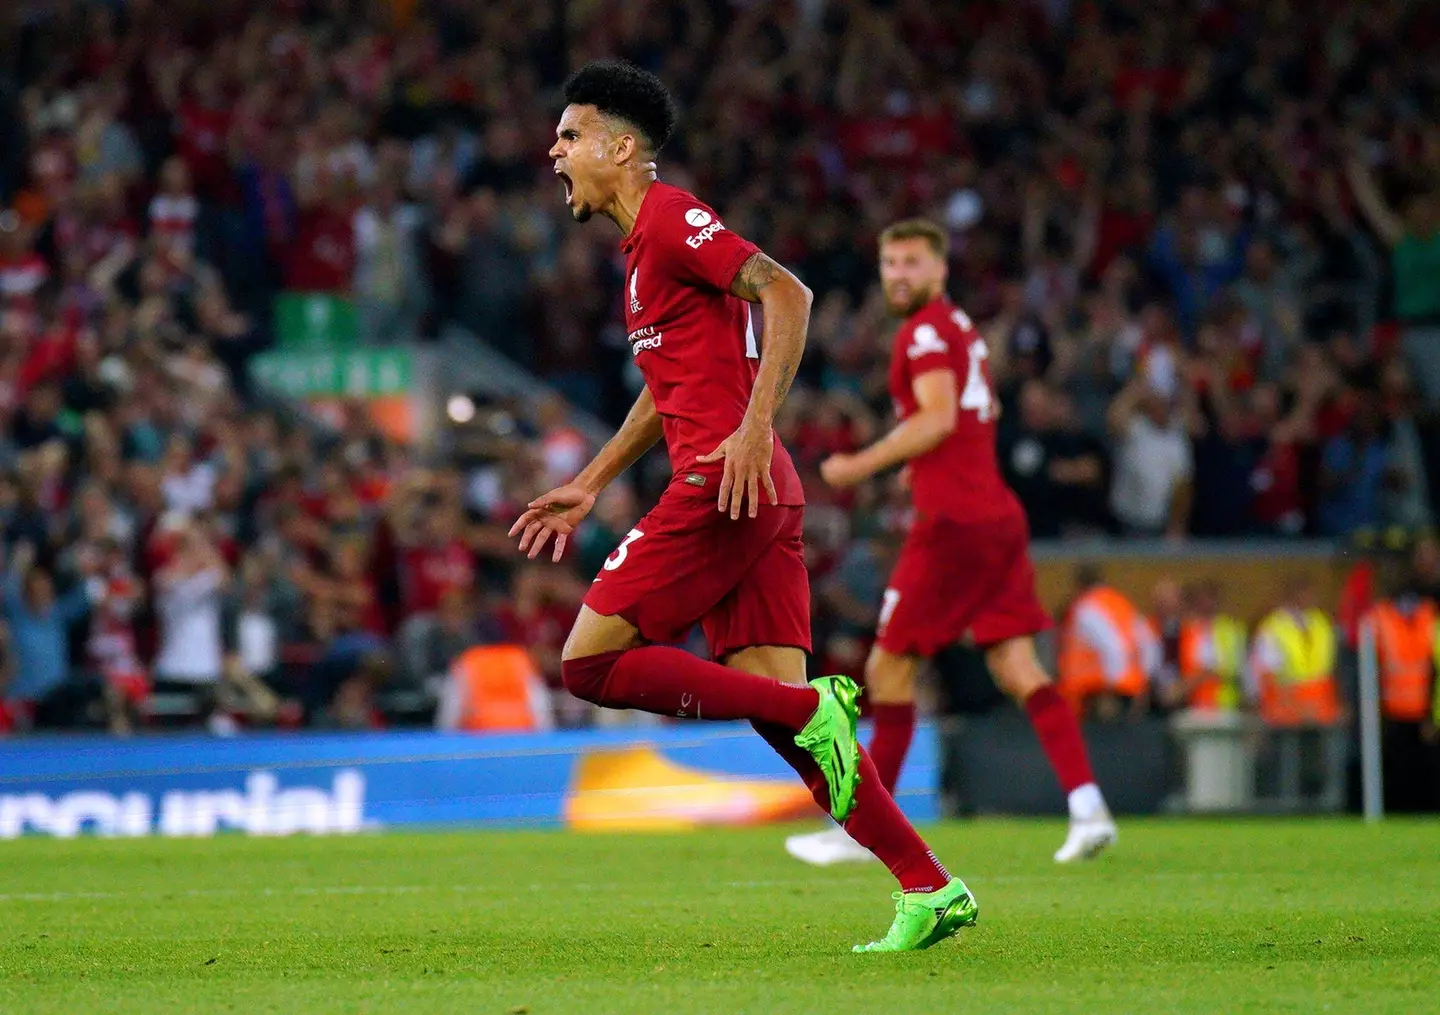 Luis Diaz salvaged a point for Liverpool with a superb strike (Image: Alamy)